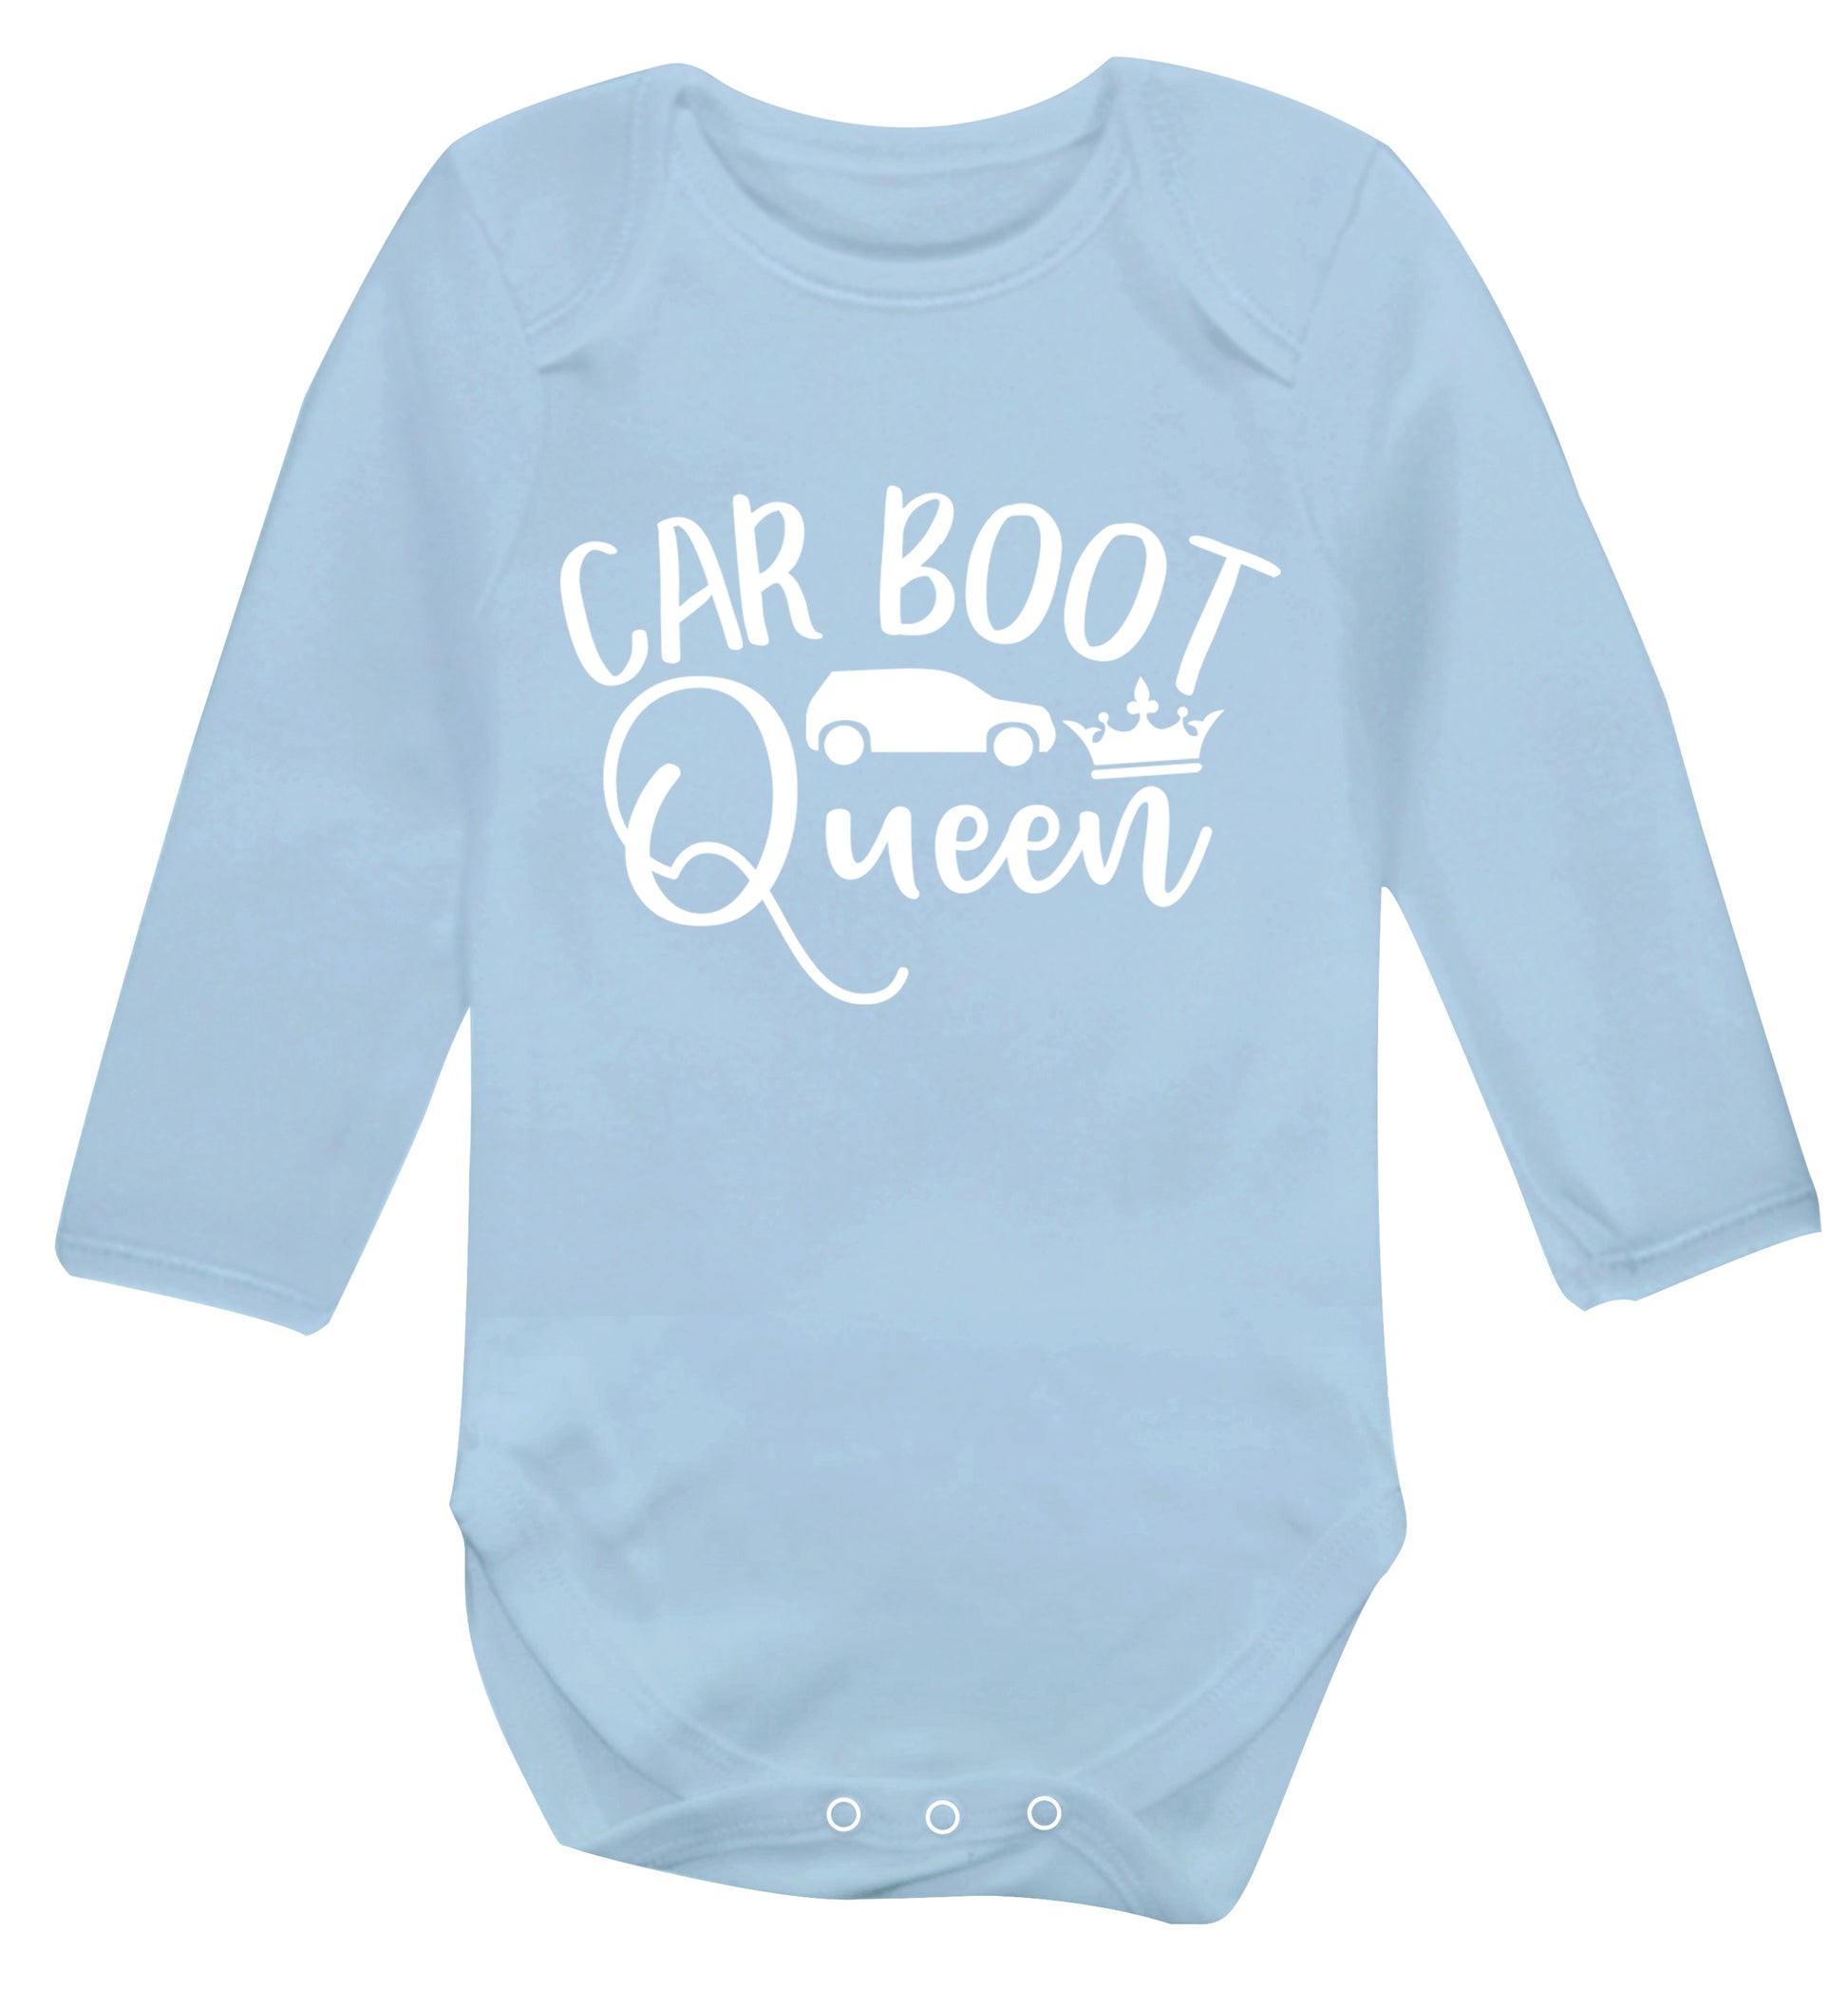 Carboot Queen Baby Vest long sleeved pale blue 6-12 months